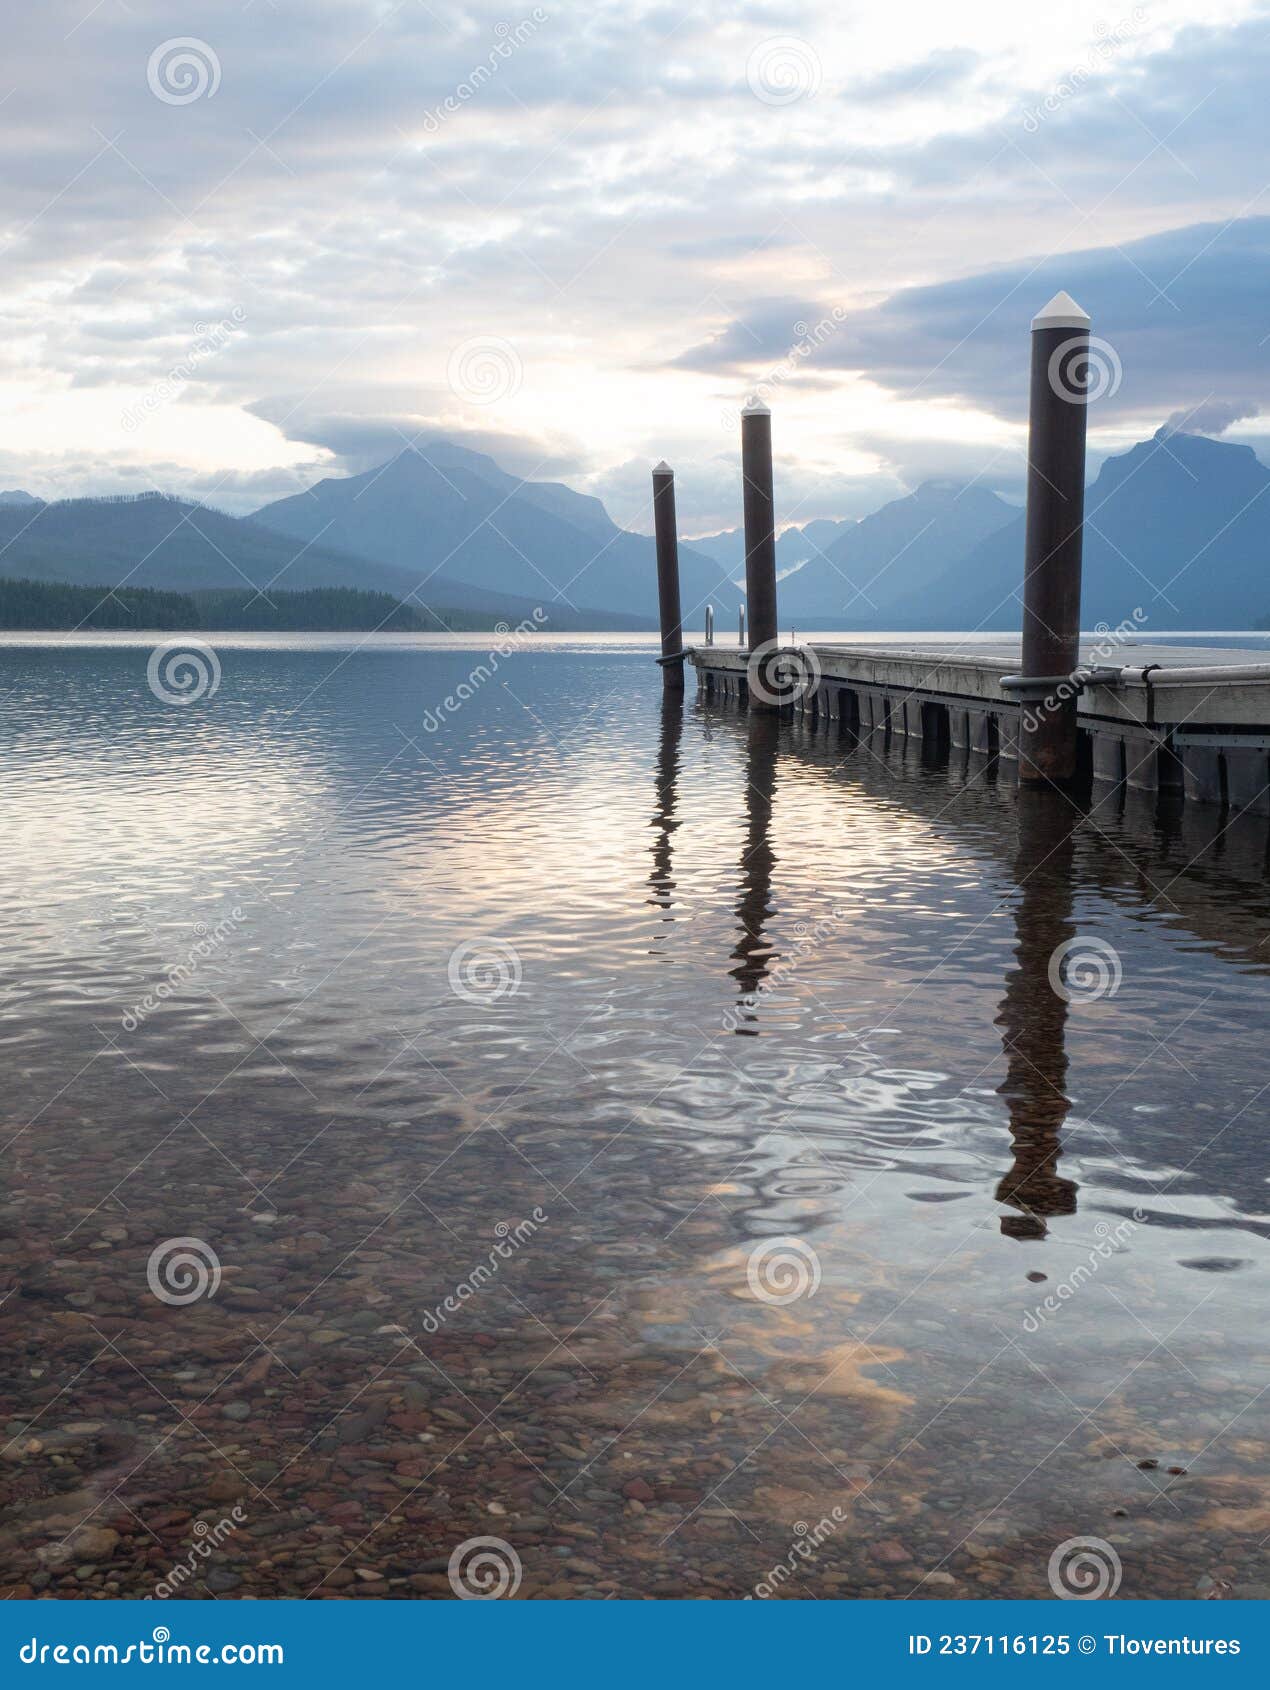 boat dock with reflection in lake mcdonald in glacier national park, montana, at dawn